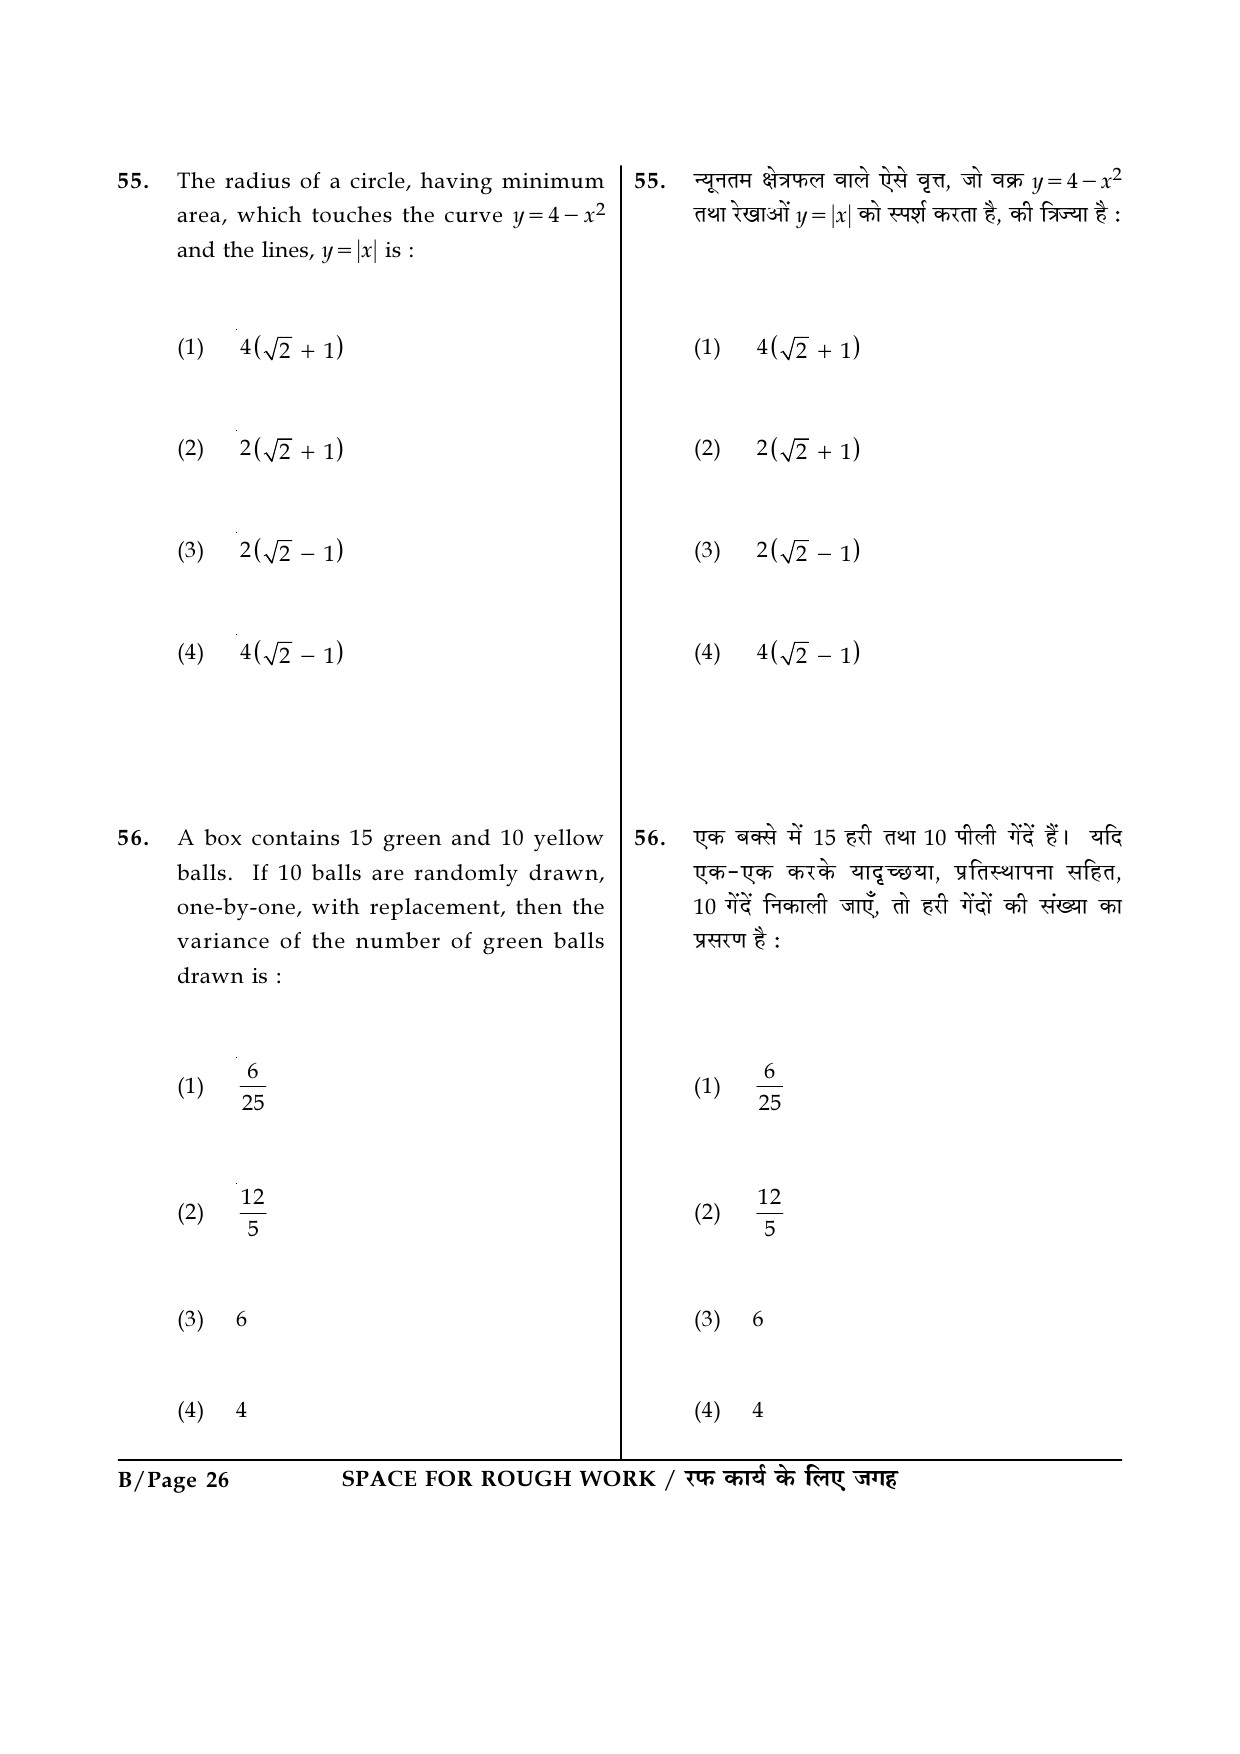 JEE Main Exam Question Paper 2017 Booklet B 26